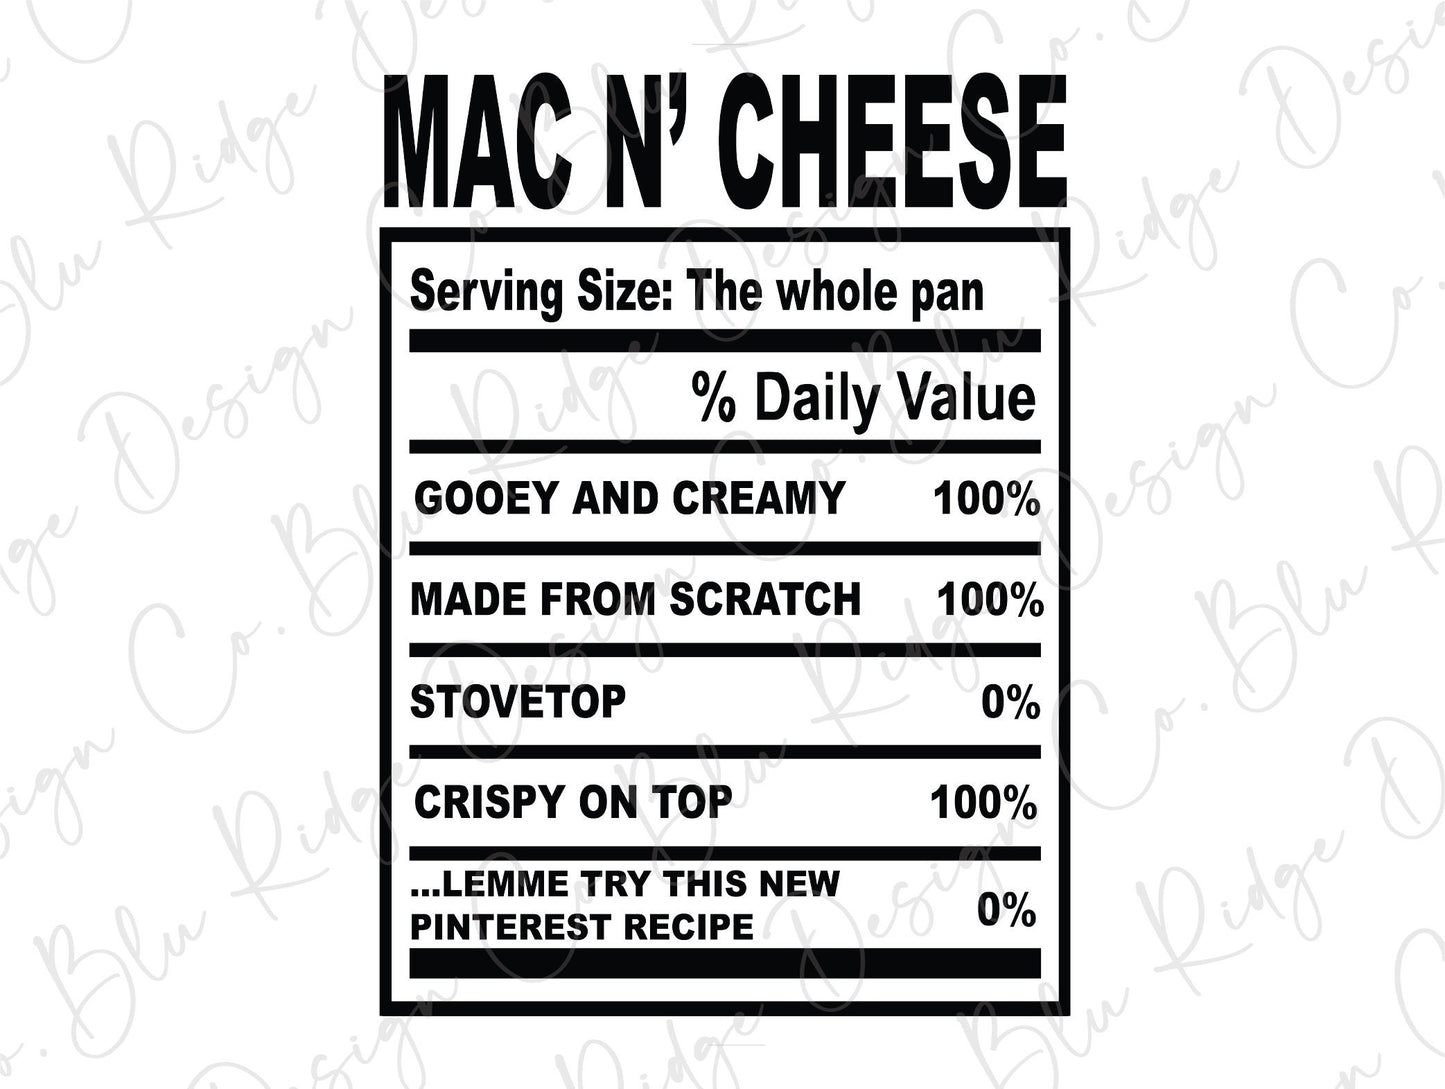 Thanksgiving Soul Food Nutrition Label Mac N Cheese Direct to Film (DTF) Transfer